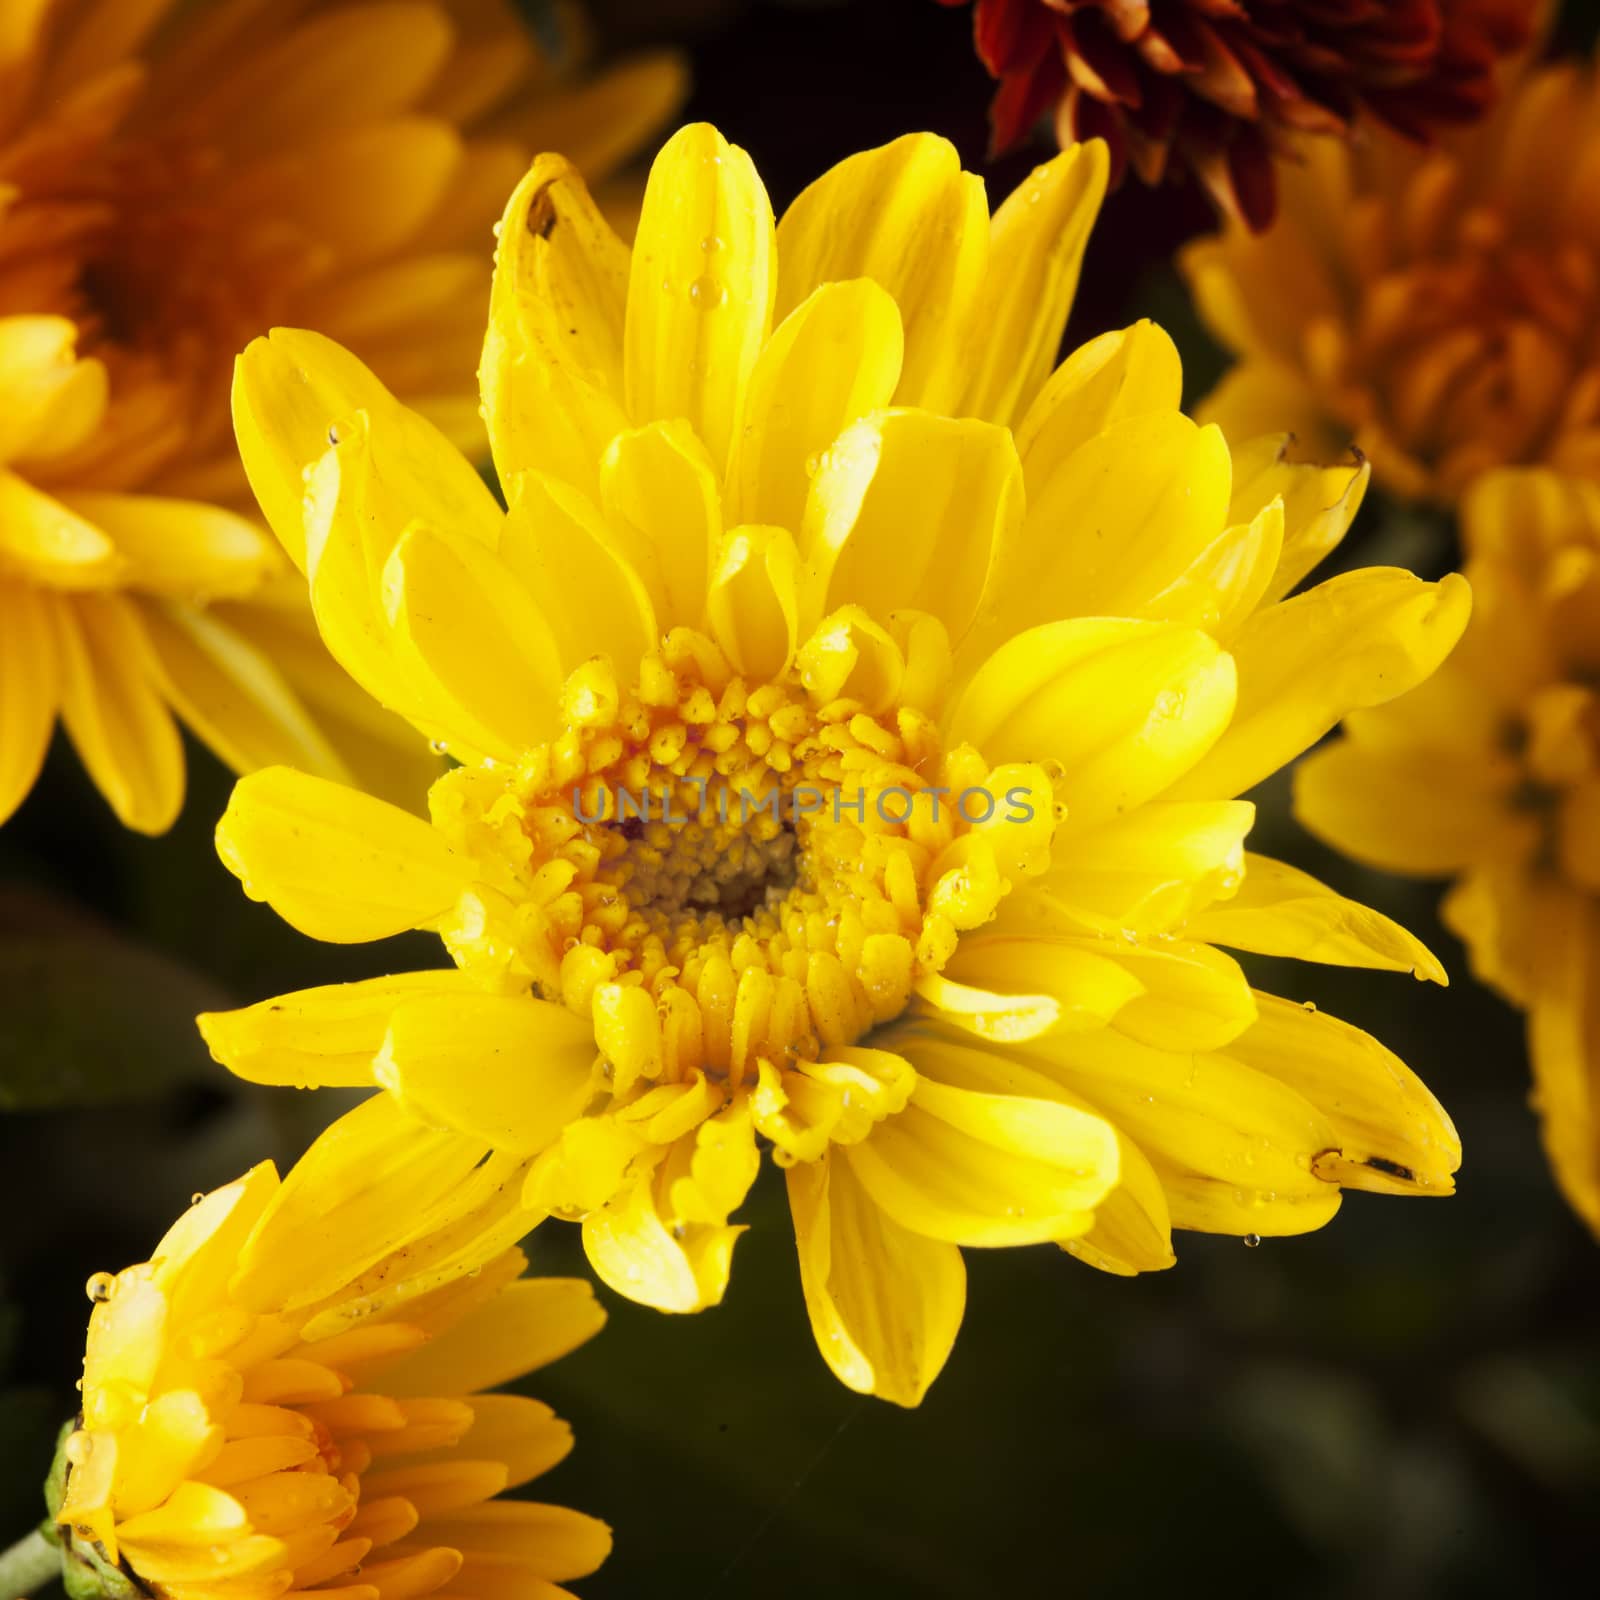 Yellow chrysanthemum in a bunch, close up